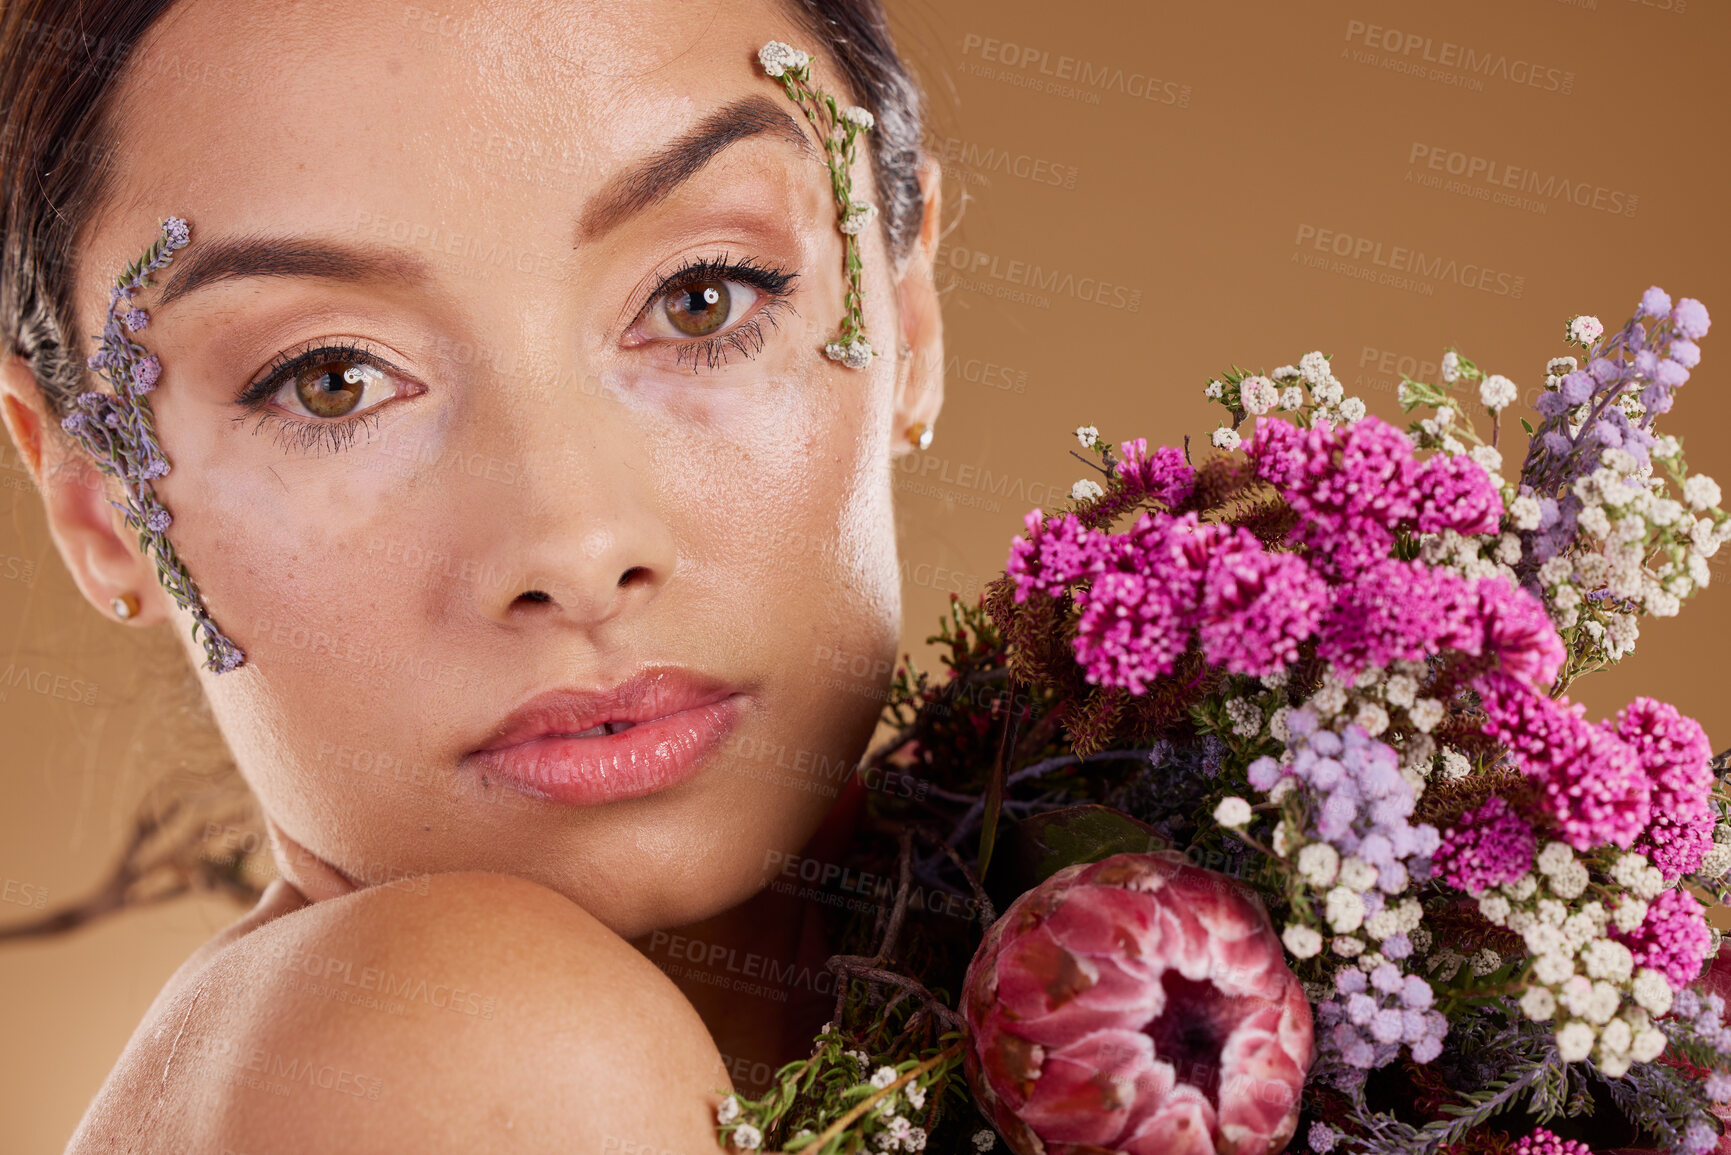 Buy stock photo Makeup, flower bouquet and portrait of relax woman with eco friendly cosmetics, natural facial product or lavender skincare. Wellness, spa salon or aesthetic model face with sustainable floral beauty